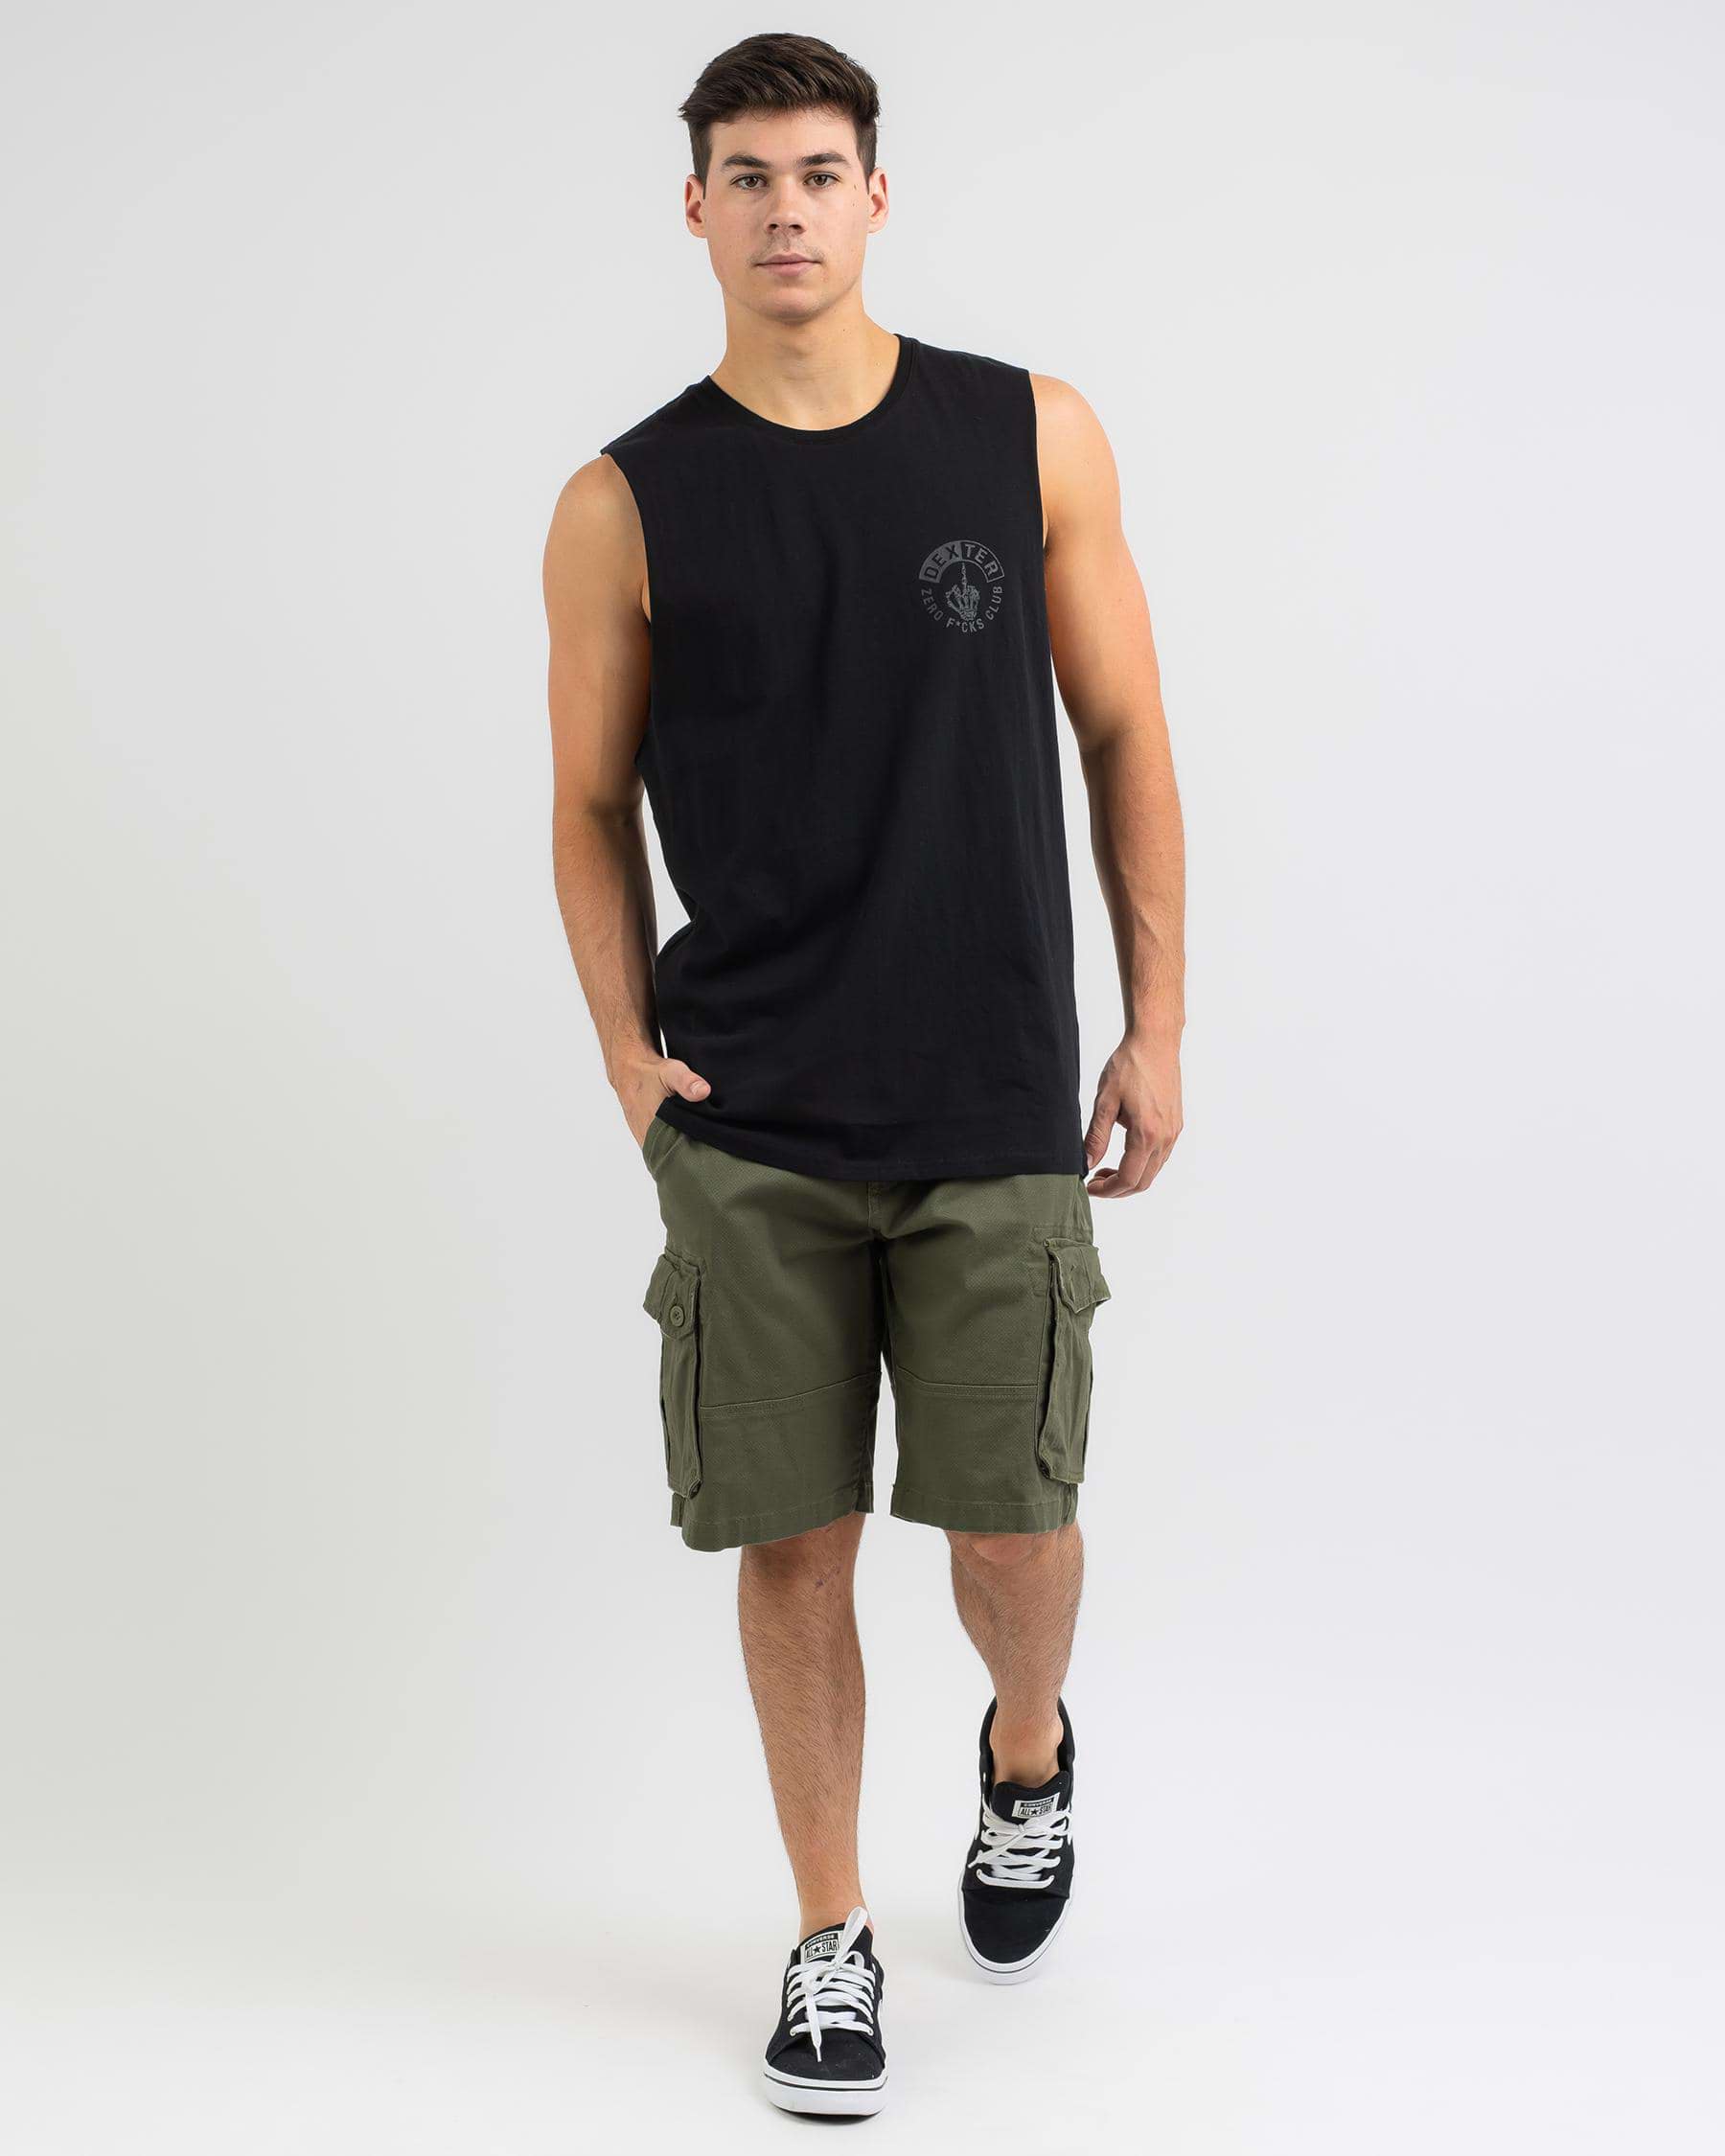 Dexter Augmented Muscle Tank In Black - Fast Shipping & Easy Returns ...